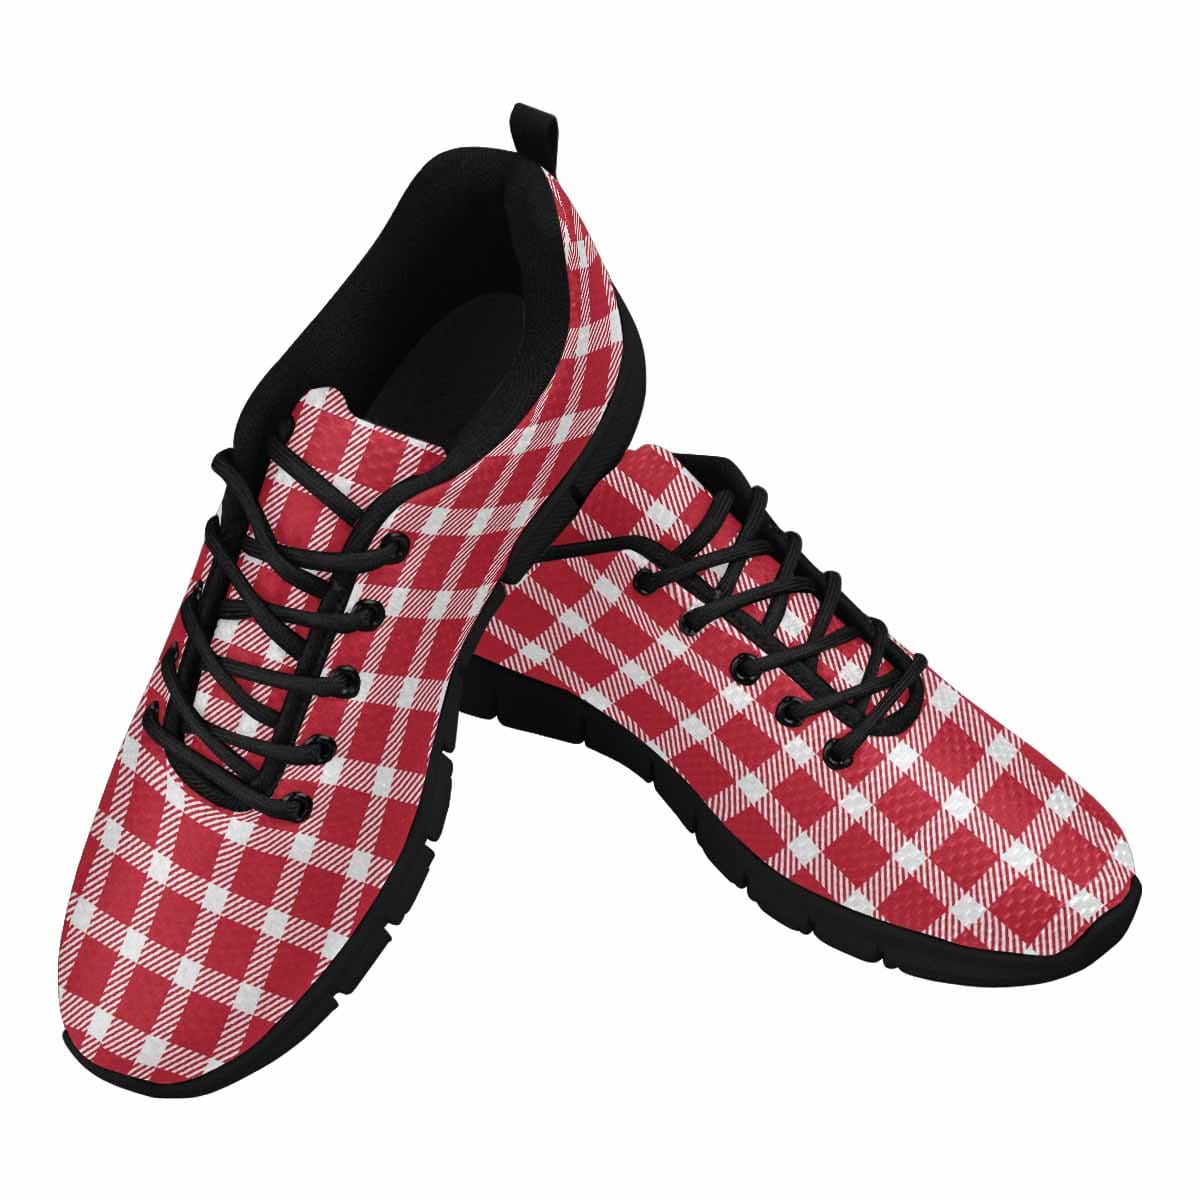 Sneakers For Men Buffalo Plaid Red And White - Running Shoes Dg856 - Mens |